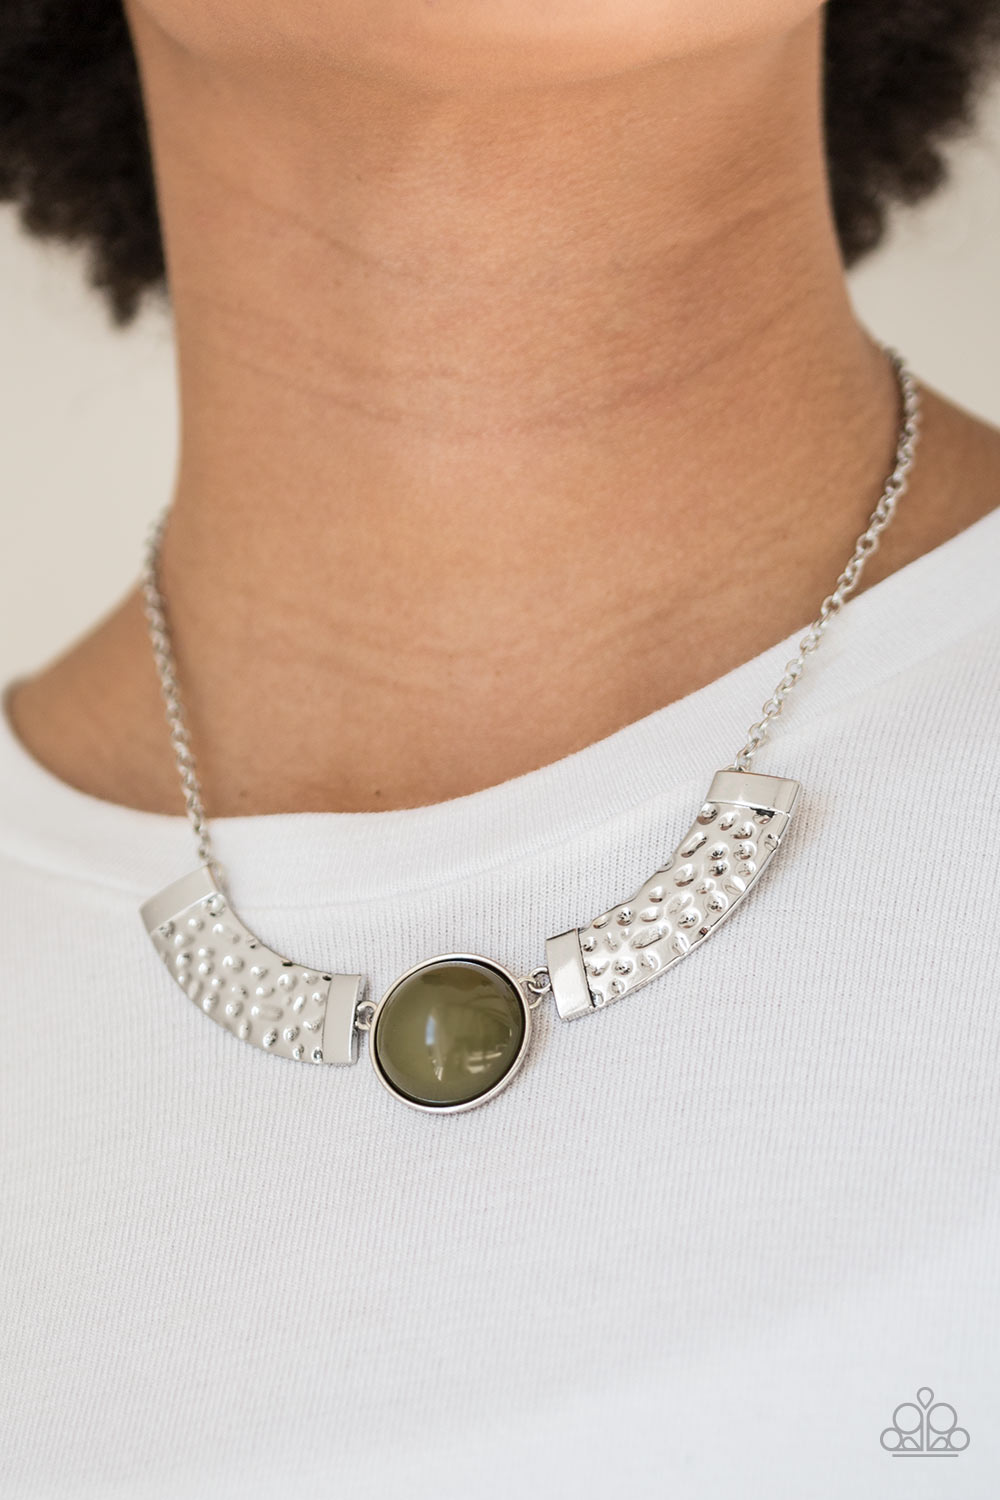 Egyptian Spell Necklace - Green